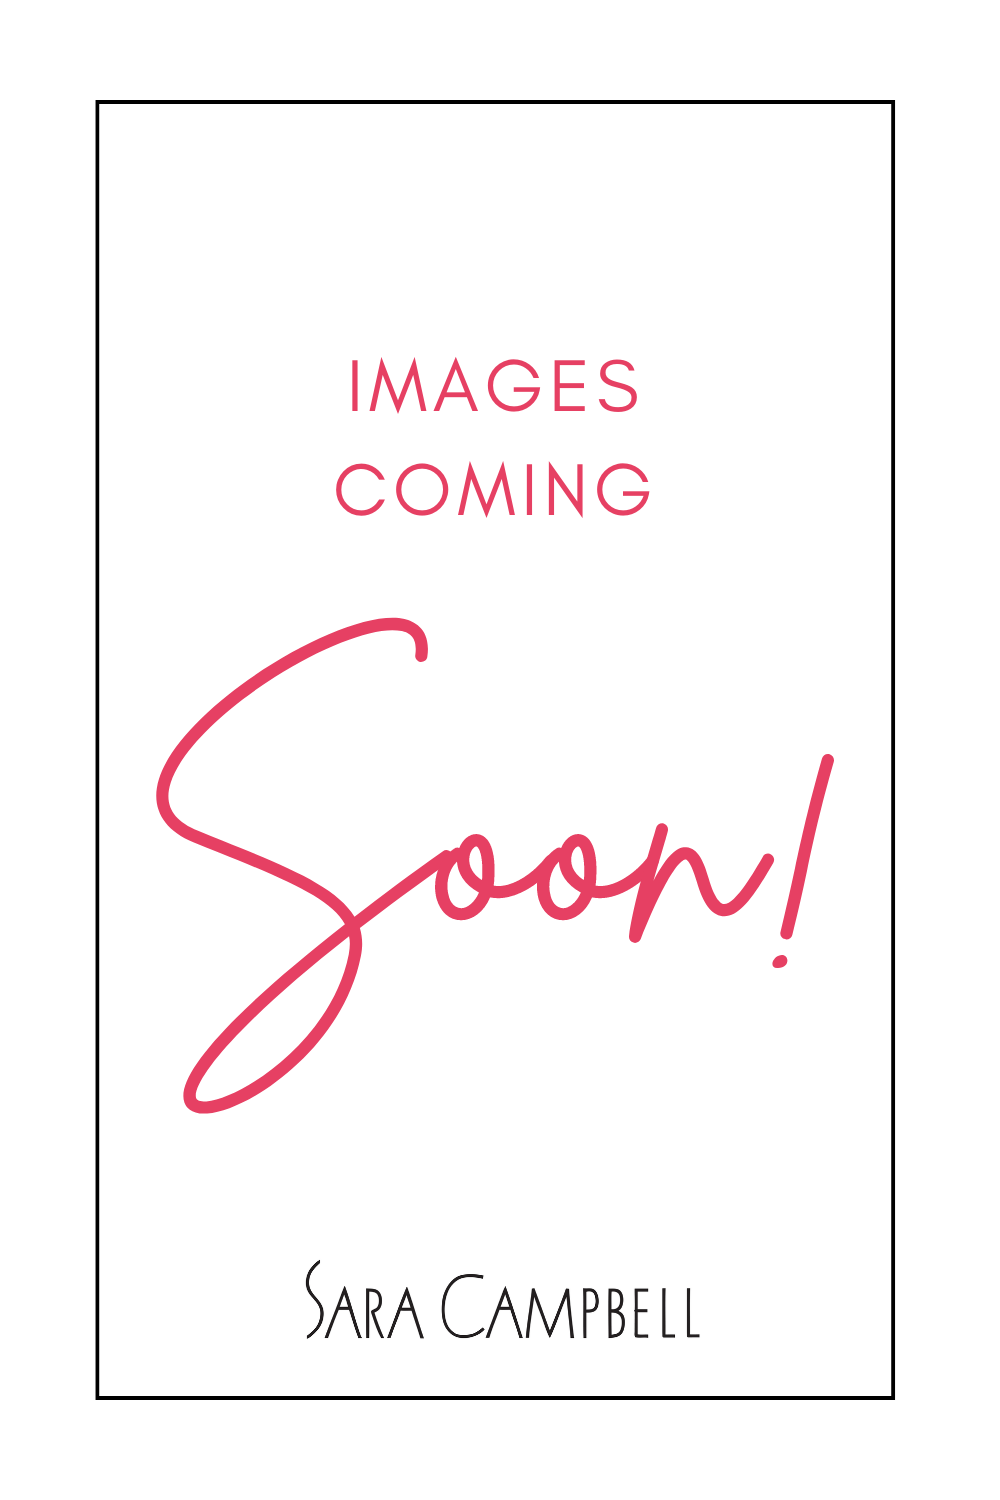 &quot;Images Coming Soon&quot; graphic